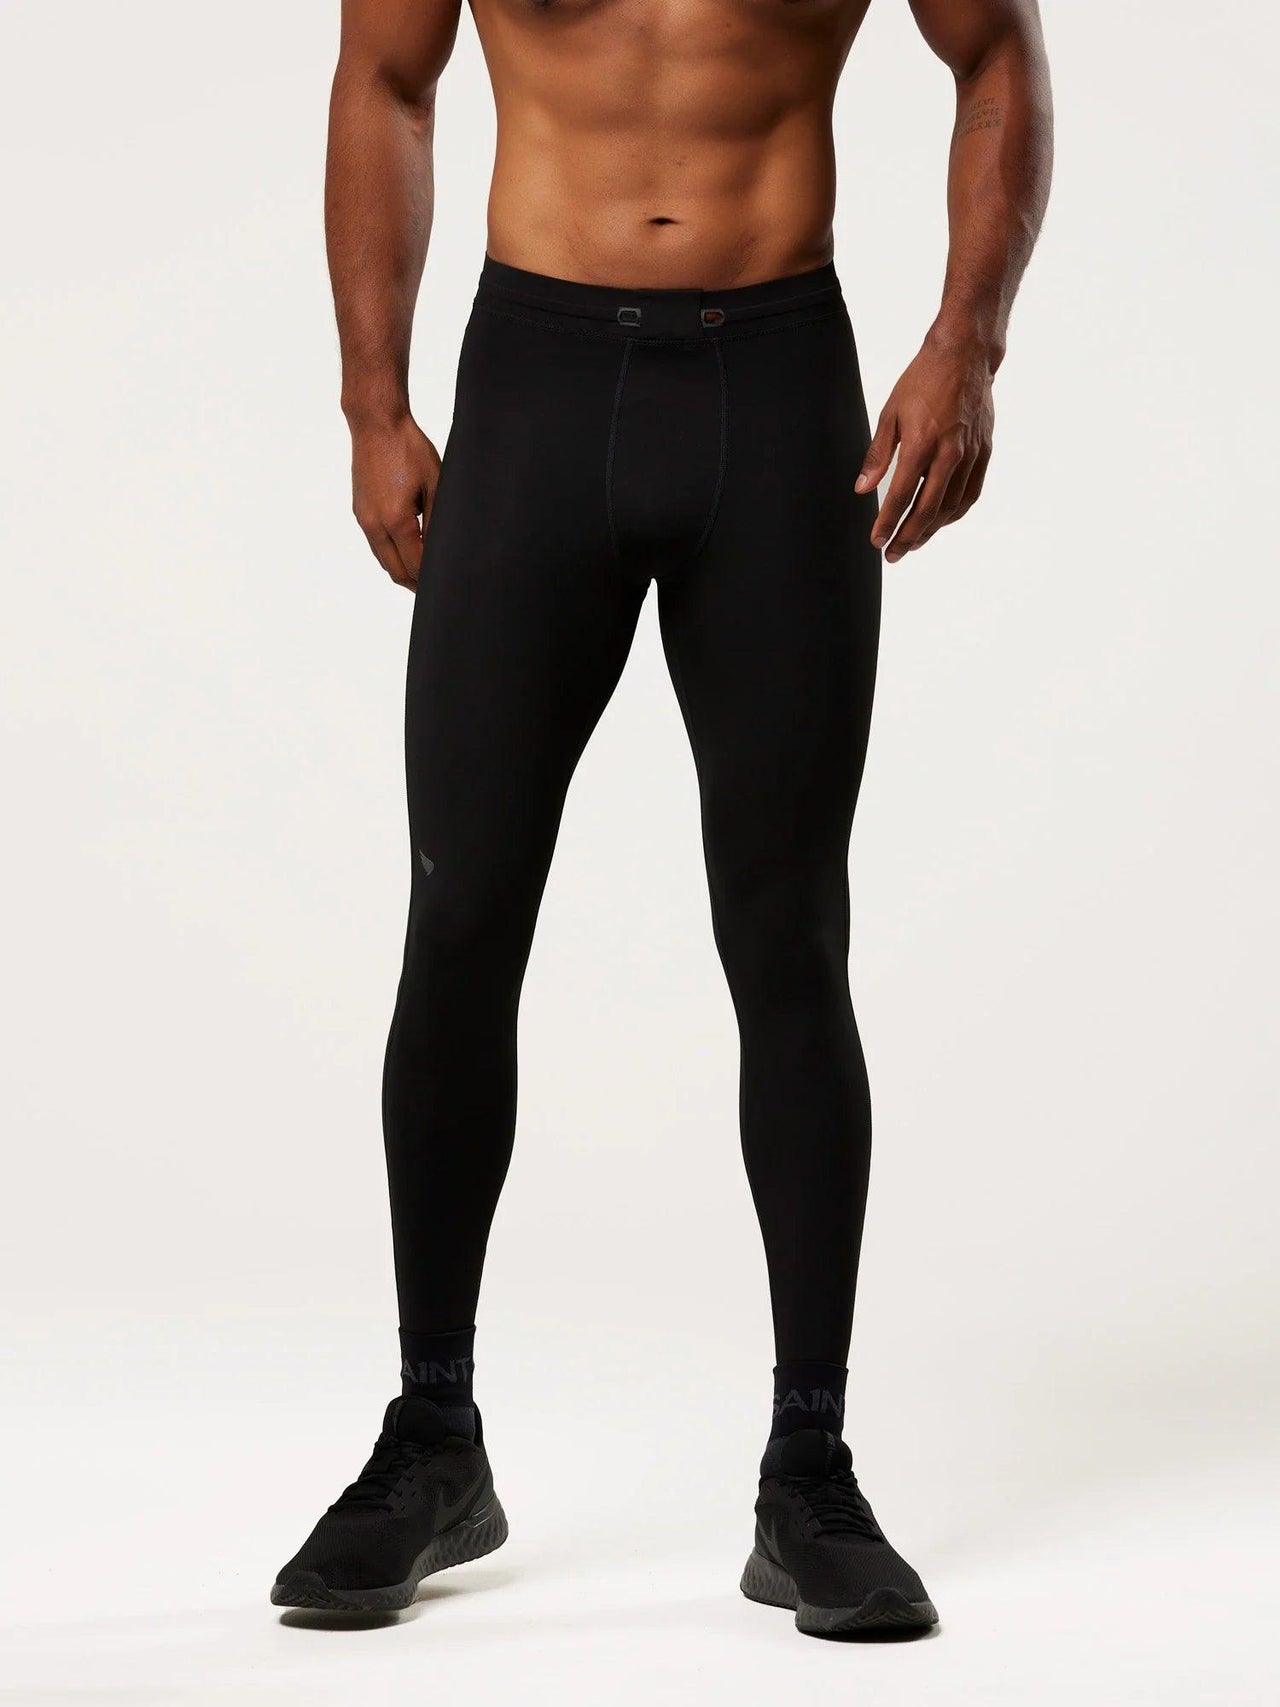 Men Tights Compression Pant Running